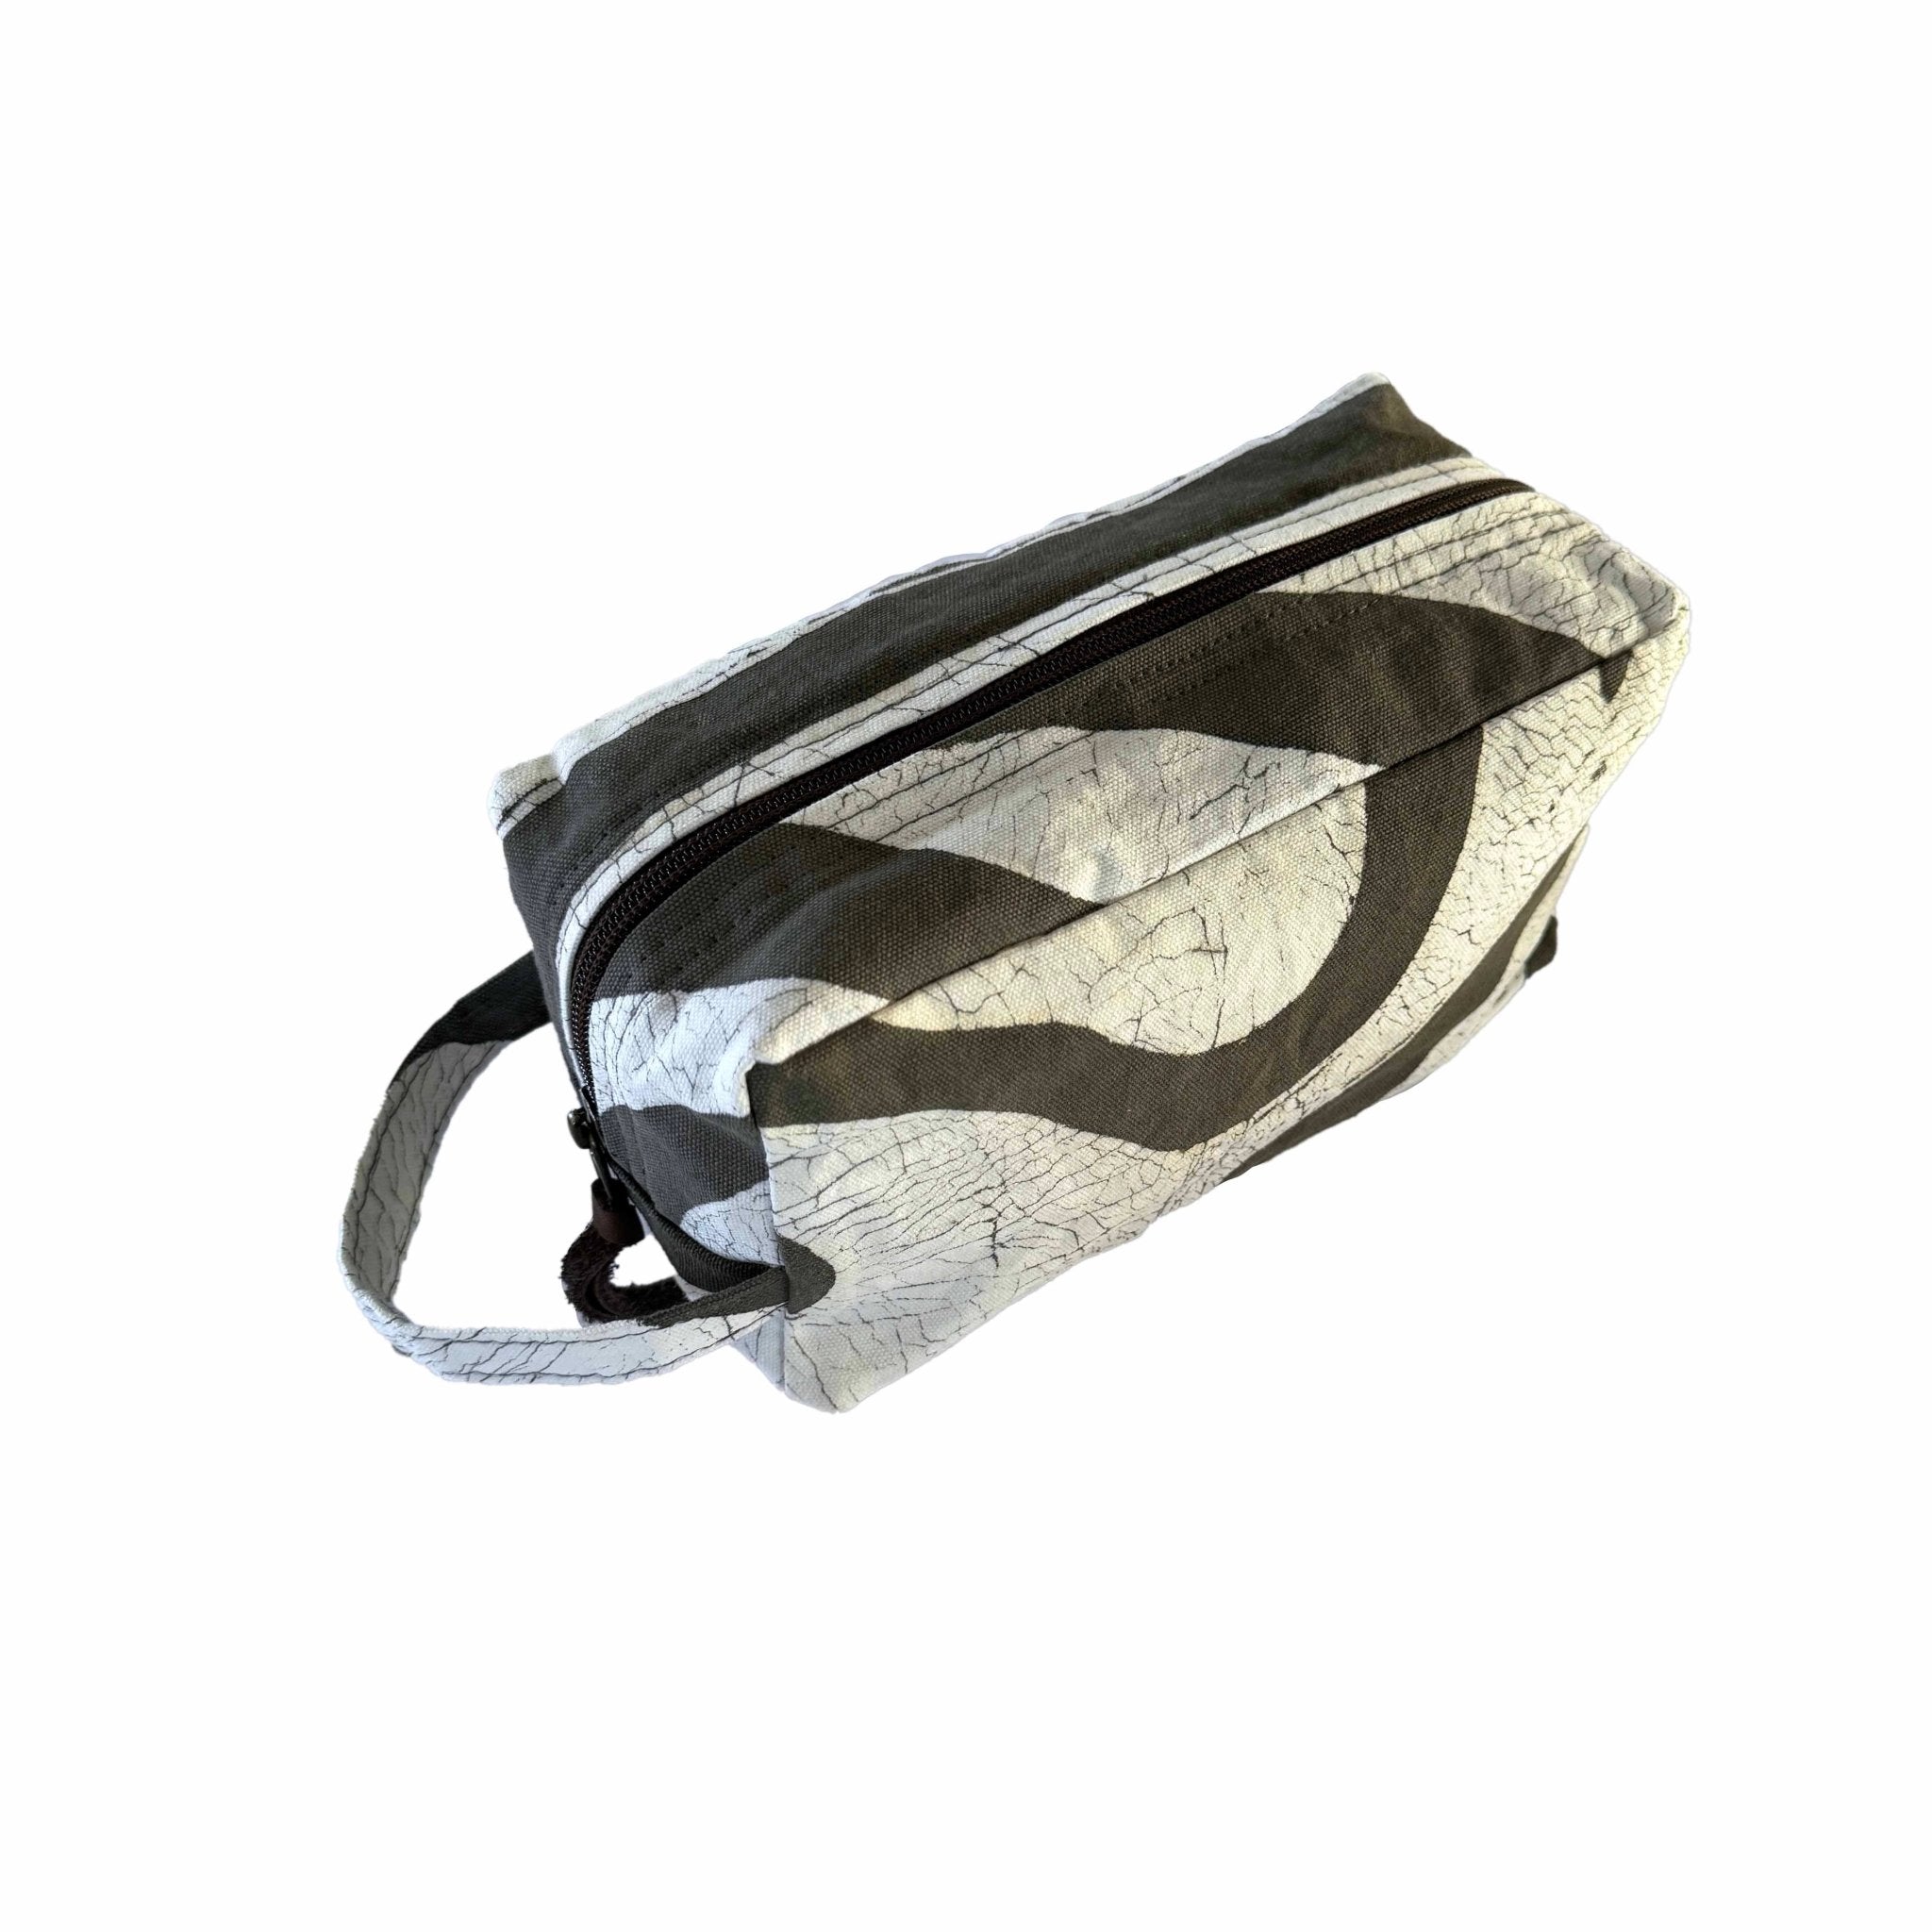 Zebra travel cosmetics case, zip up and made in 100% cotton.